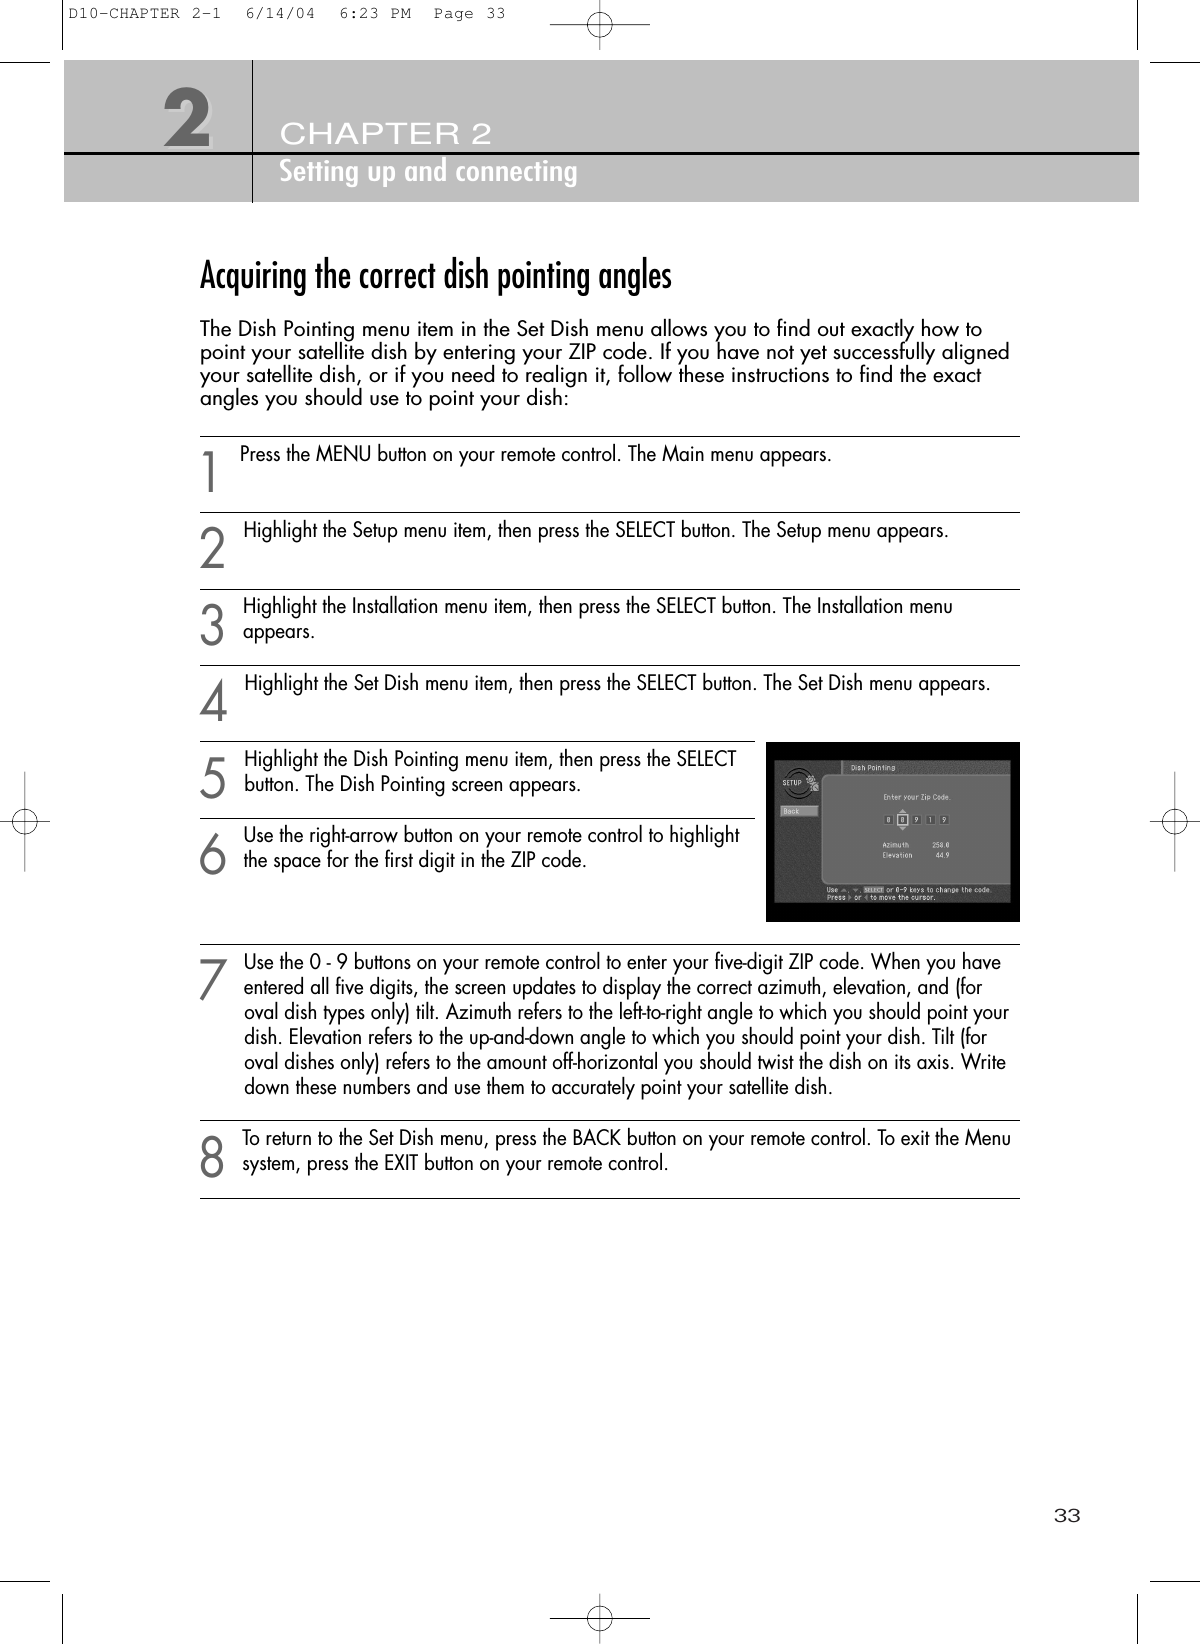 33CHAPTER 2Setting up and connecting22Acquiring the correct dish pointing anglesThe Dish Pointing menu item in the Set Dish menu allows you to find out exactly how topoint your satellite dish by entering your ZIP code. If you have not yet successfully alignedyour satellite dish, or if you need to realign it, follow these instructions to find the exactangles you should use to point your dish:1Press the MENU button on your remote control. The Main menu appears.2Highlight the Setup menu item, then press the SELECT button. The Setup menu appears.3Highlight the Installation menu item, then press the SELECT button. The Installation menuappears.4Highlight the Set Dish menu item, then press the SELECT button. The Set Dish menu appears.5Highlight the Dish Pointing menu item, then press the SELECTbutton. The Dish Pointing screen appears.6Use the right-arrow button on your remote control to highlightthe space for the first digit in the ZIP code.7Use the 0 - 9 buttons on your remote control to enter your five-digit ZIP code. When you haveentered all five digits, the screen updates to display the correct azimuth, elevation, and (for oval dish types only) tilt. Azimuth refers to the left-to-right angle to which you should point your dish. Elevation refers to the up-and-down angle to which you should point your dish. Tilt (for oval dishes only) refers to the amount off-horizontal you should twist the dish on its axis. Write down these numbers and use them to accurately point your satellite dish.8To return to the Set Dish menu, press the BACK button on your remote control. To exit the Menusystem, press the EXIT button on your remote control.D10-CHAPTER 2-1  6/14/04  6:23 PM  Page 33